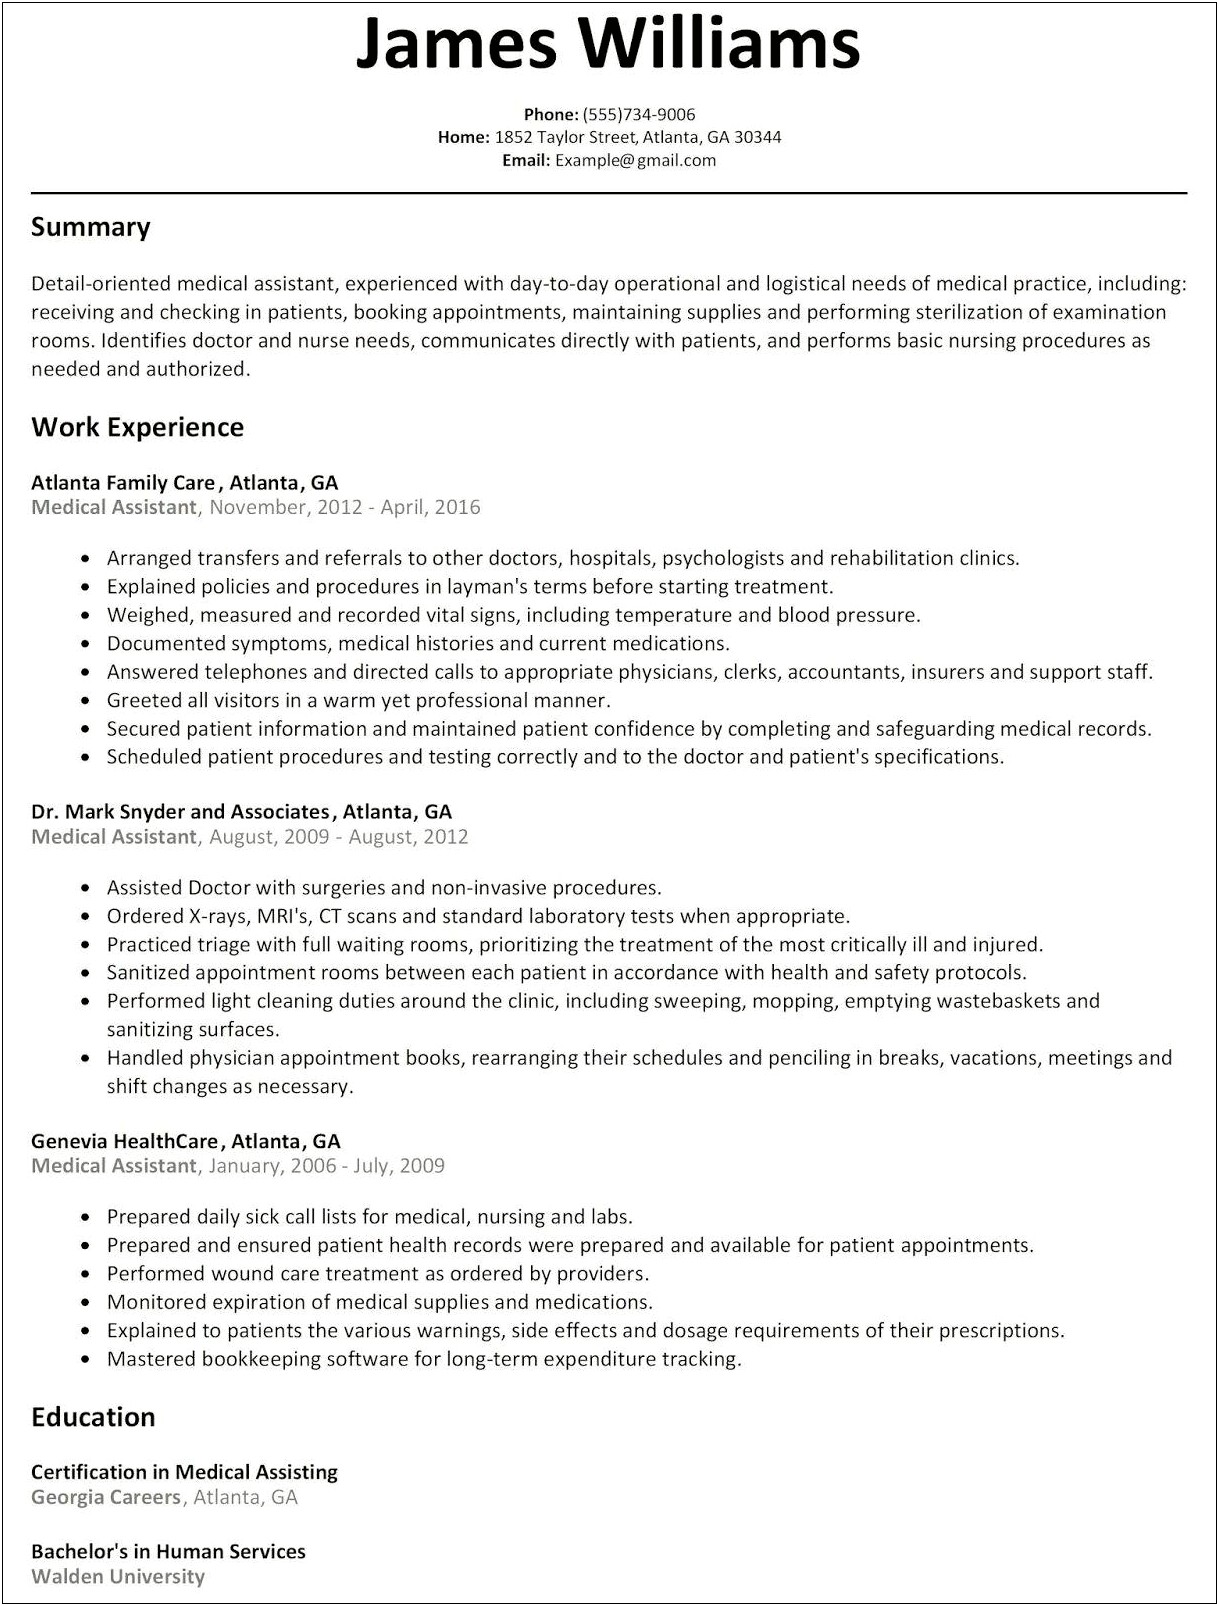 Experienced Police Officer Resume Objective